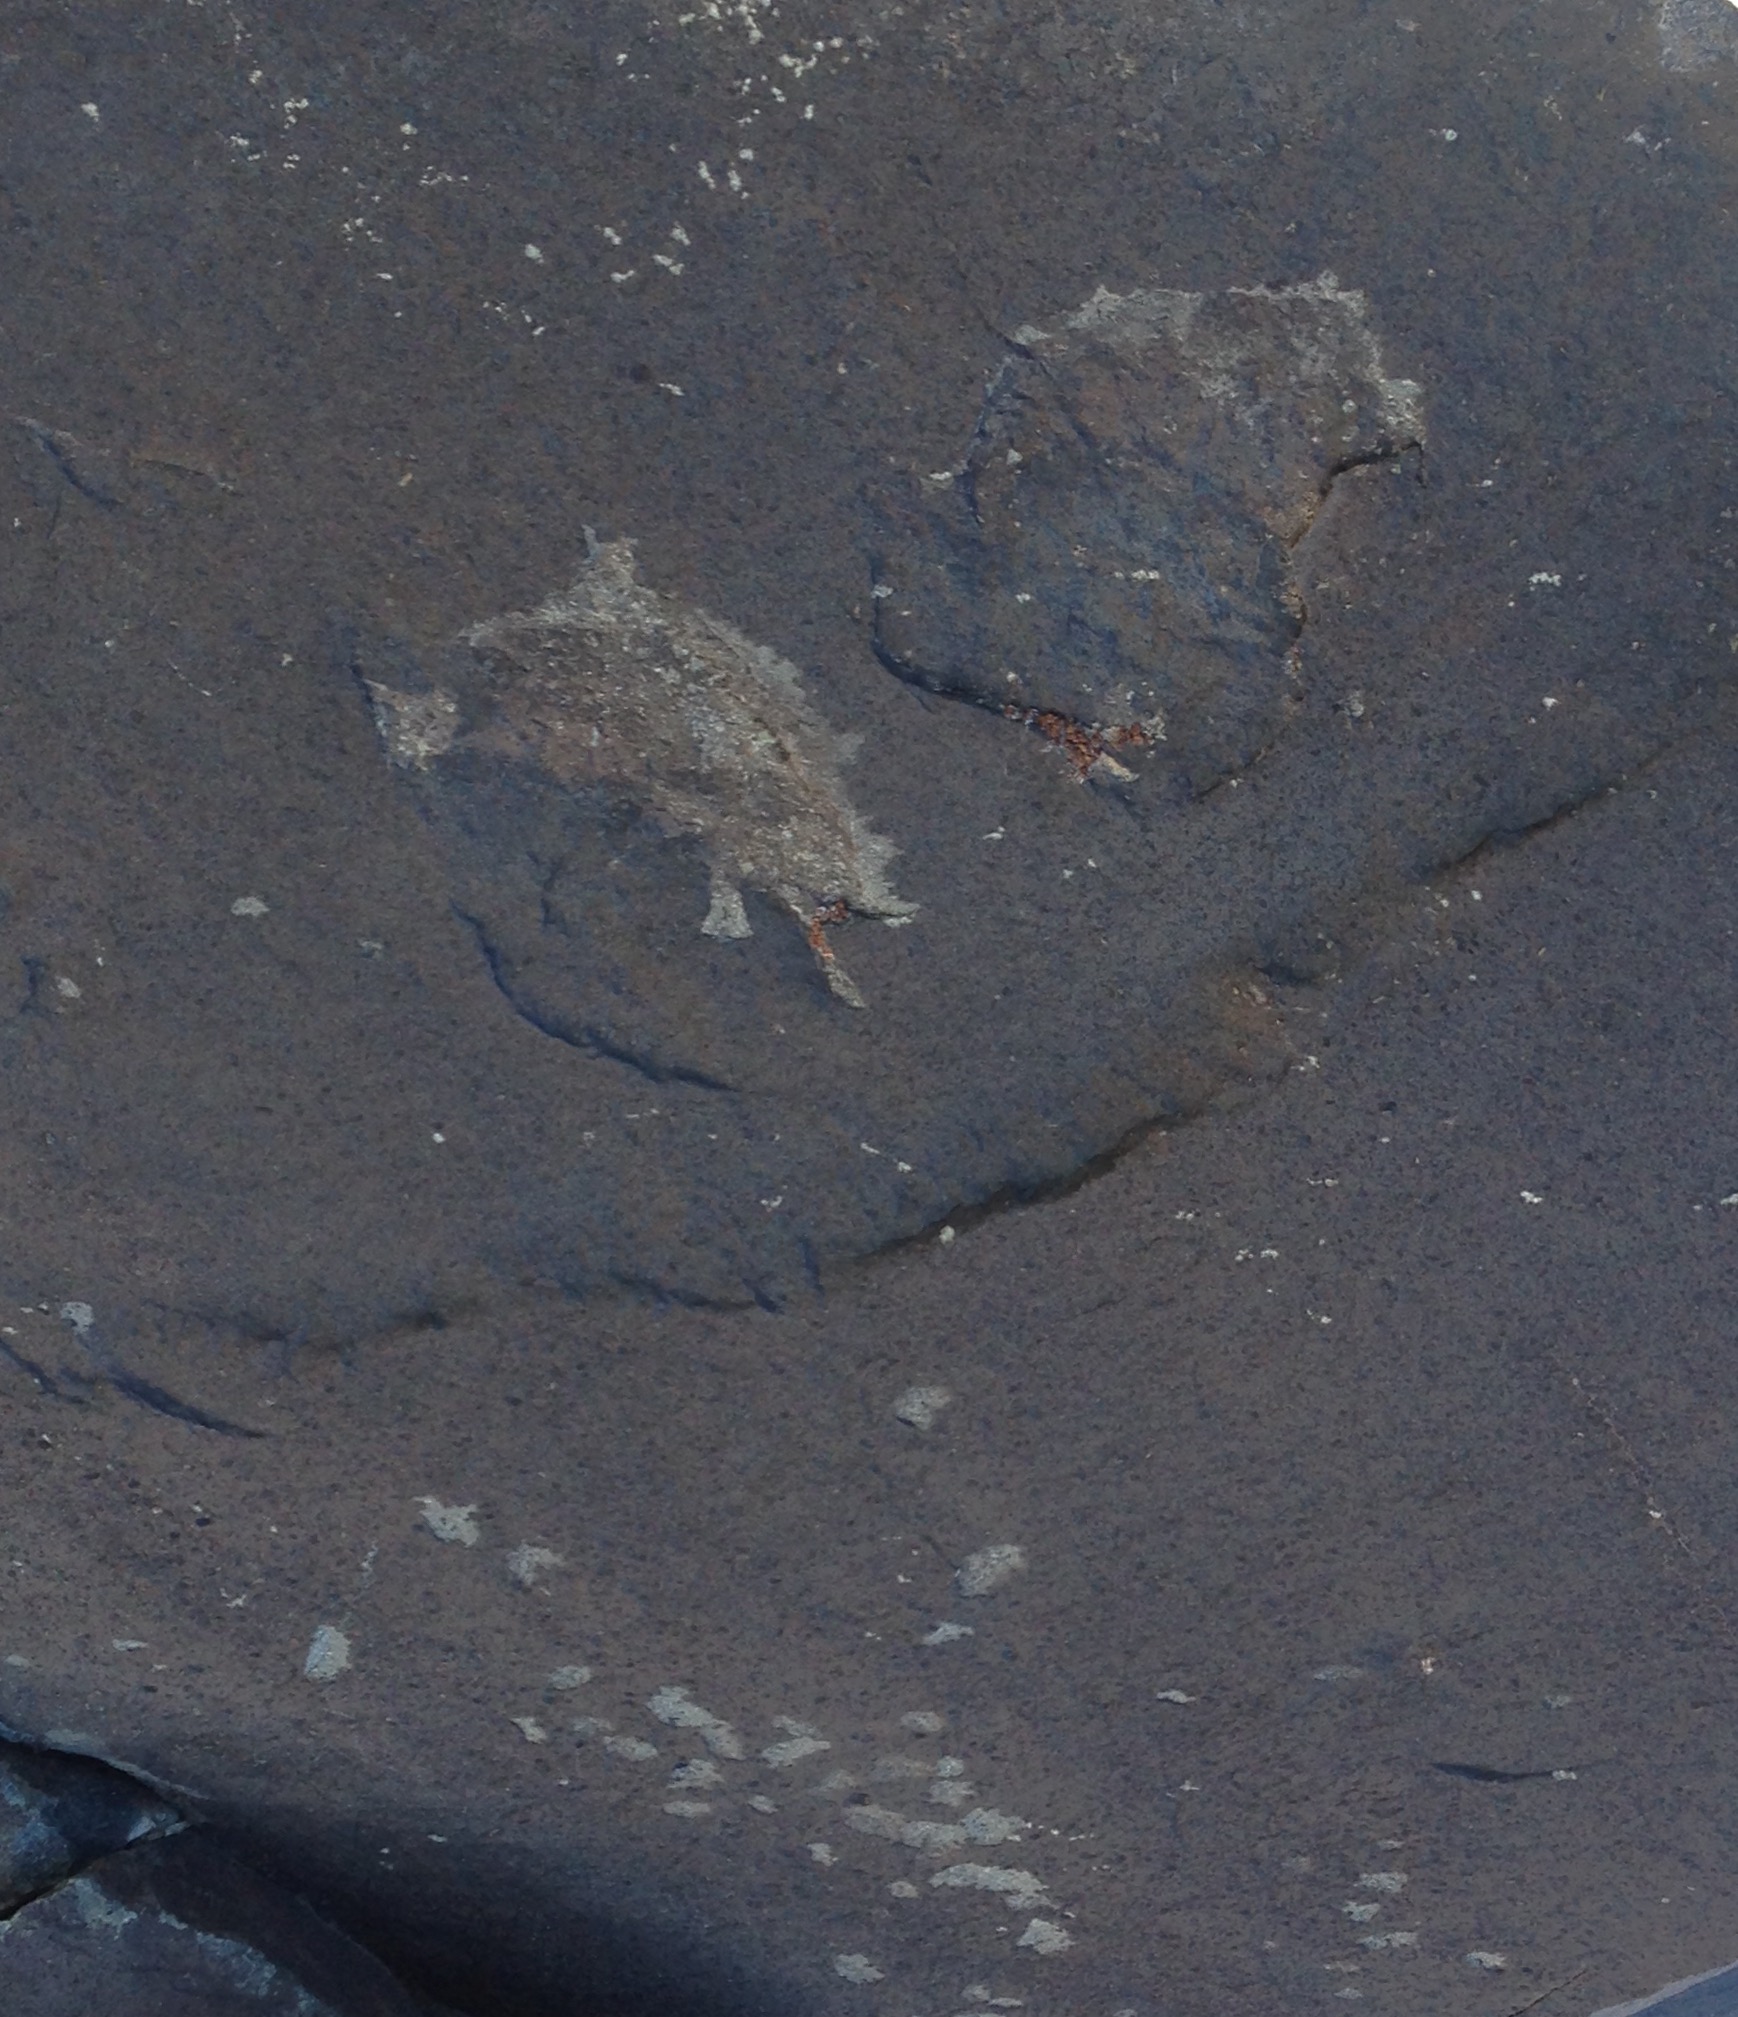 A petroglyph of something sitting on top of a rock? Looking at the stars? 